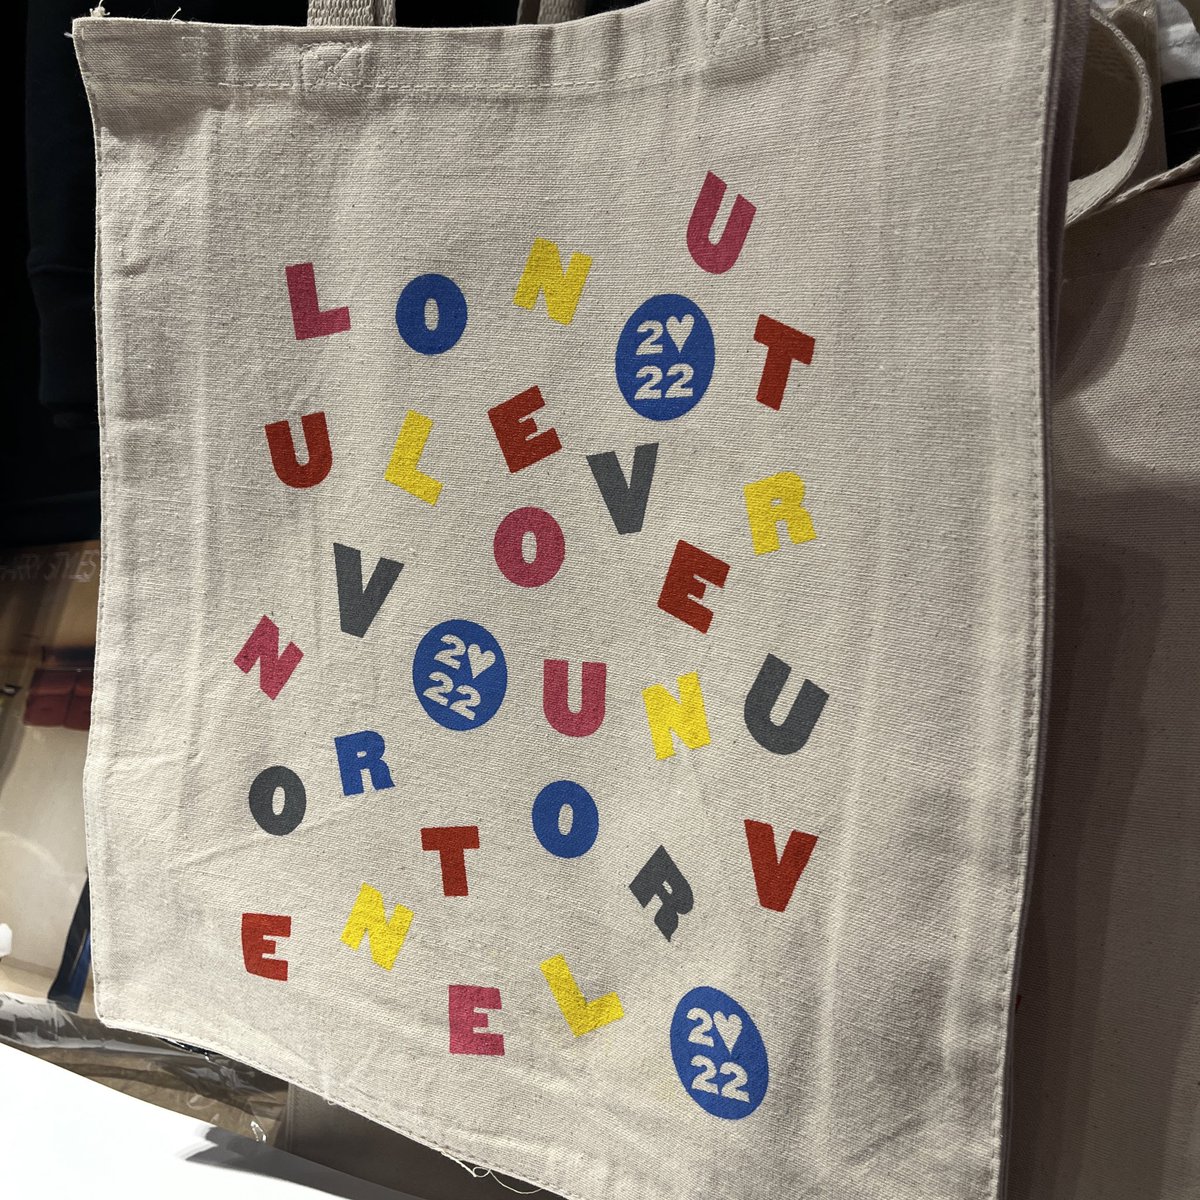 Scotiabank Arena on X: The Harry Styles Love On Tour Merch Pop-Up